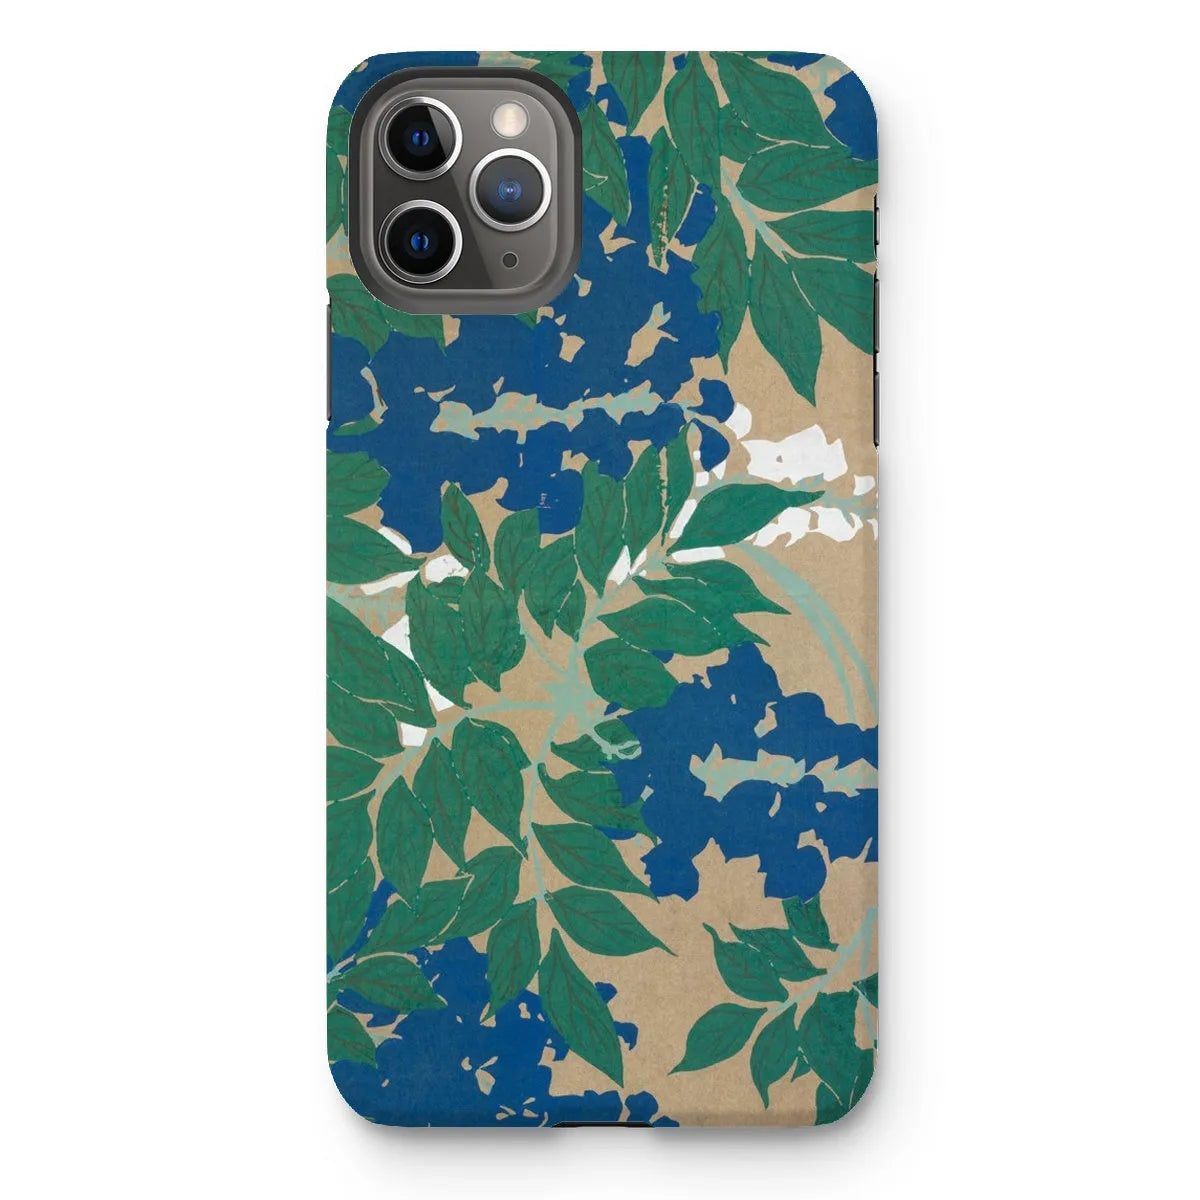 Wisteria From Momoyogusa - Floral Phone Case - Kamisaka Sekka - Iphone 11 Pro Max / Matte - Mobile Phone Cases